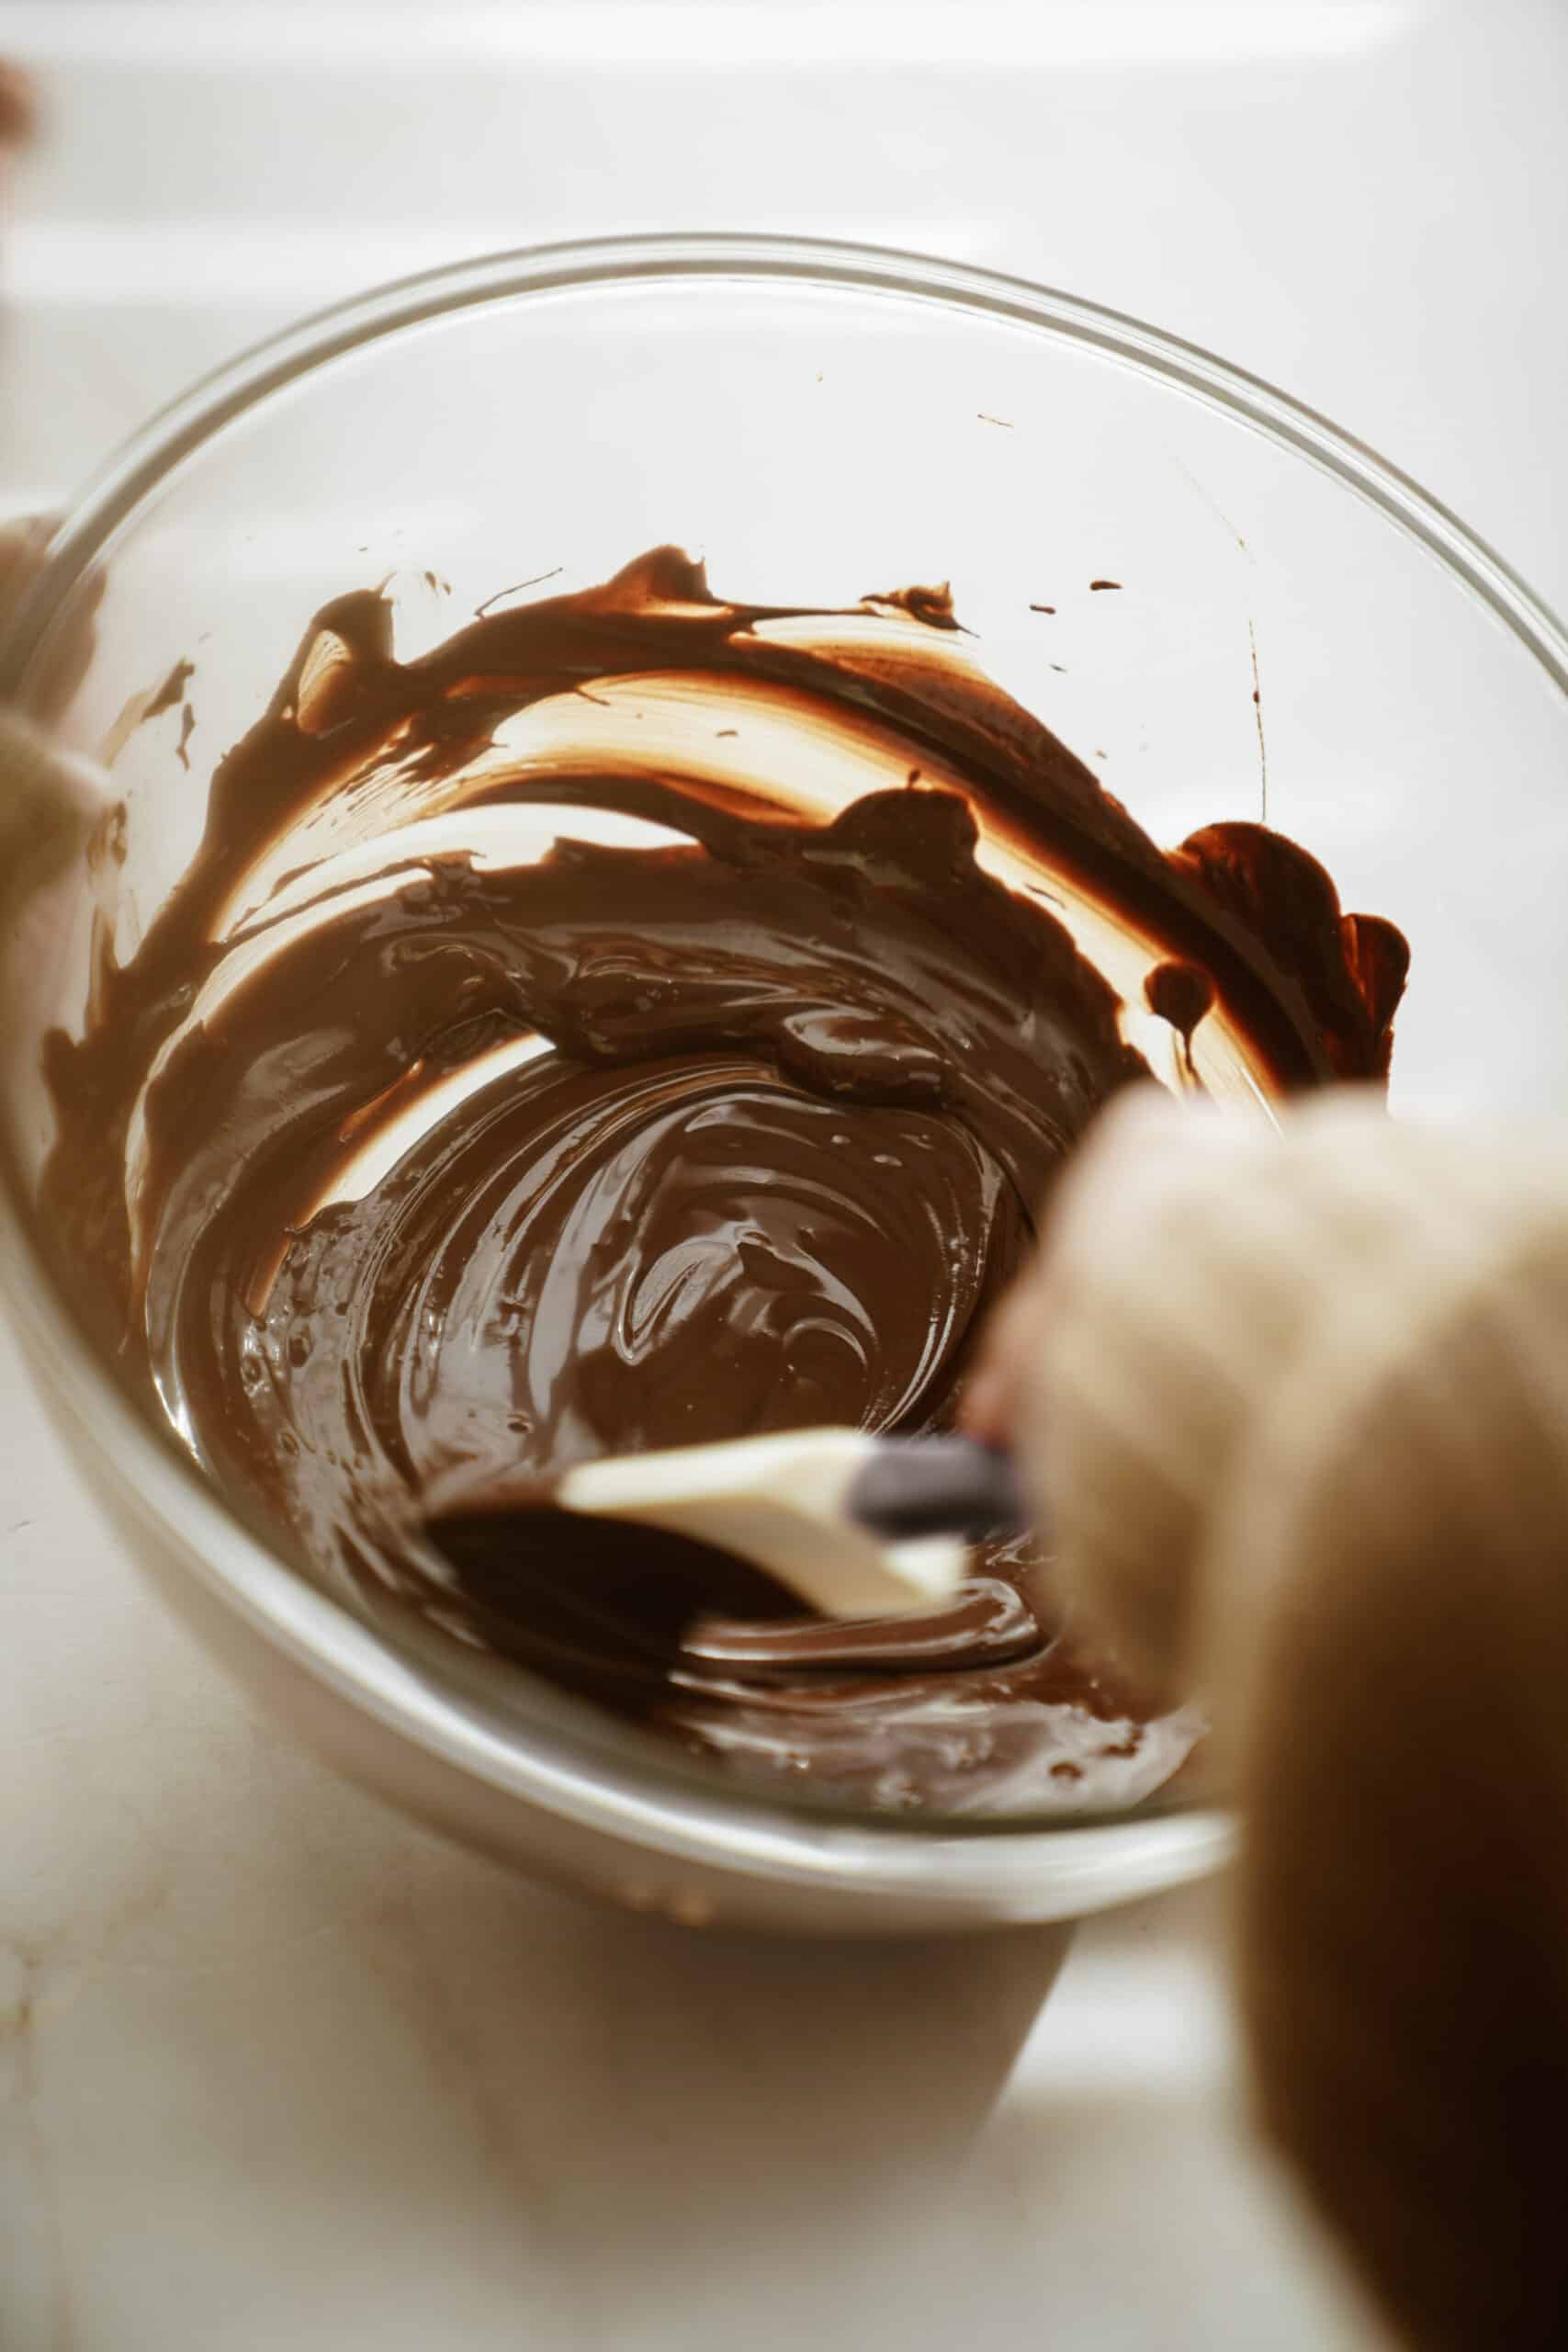 Chocolate being mixed in a bowl